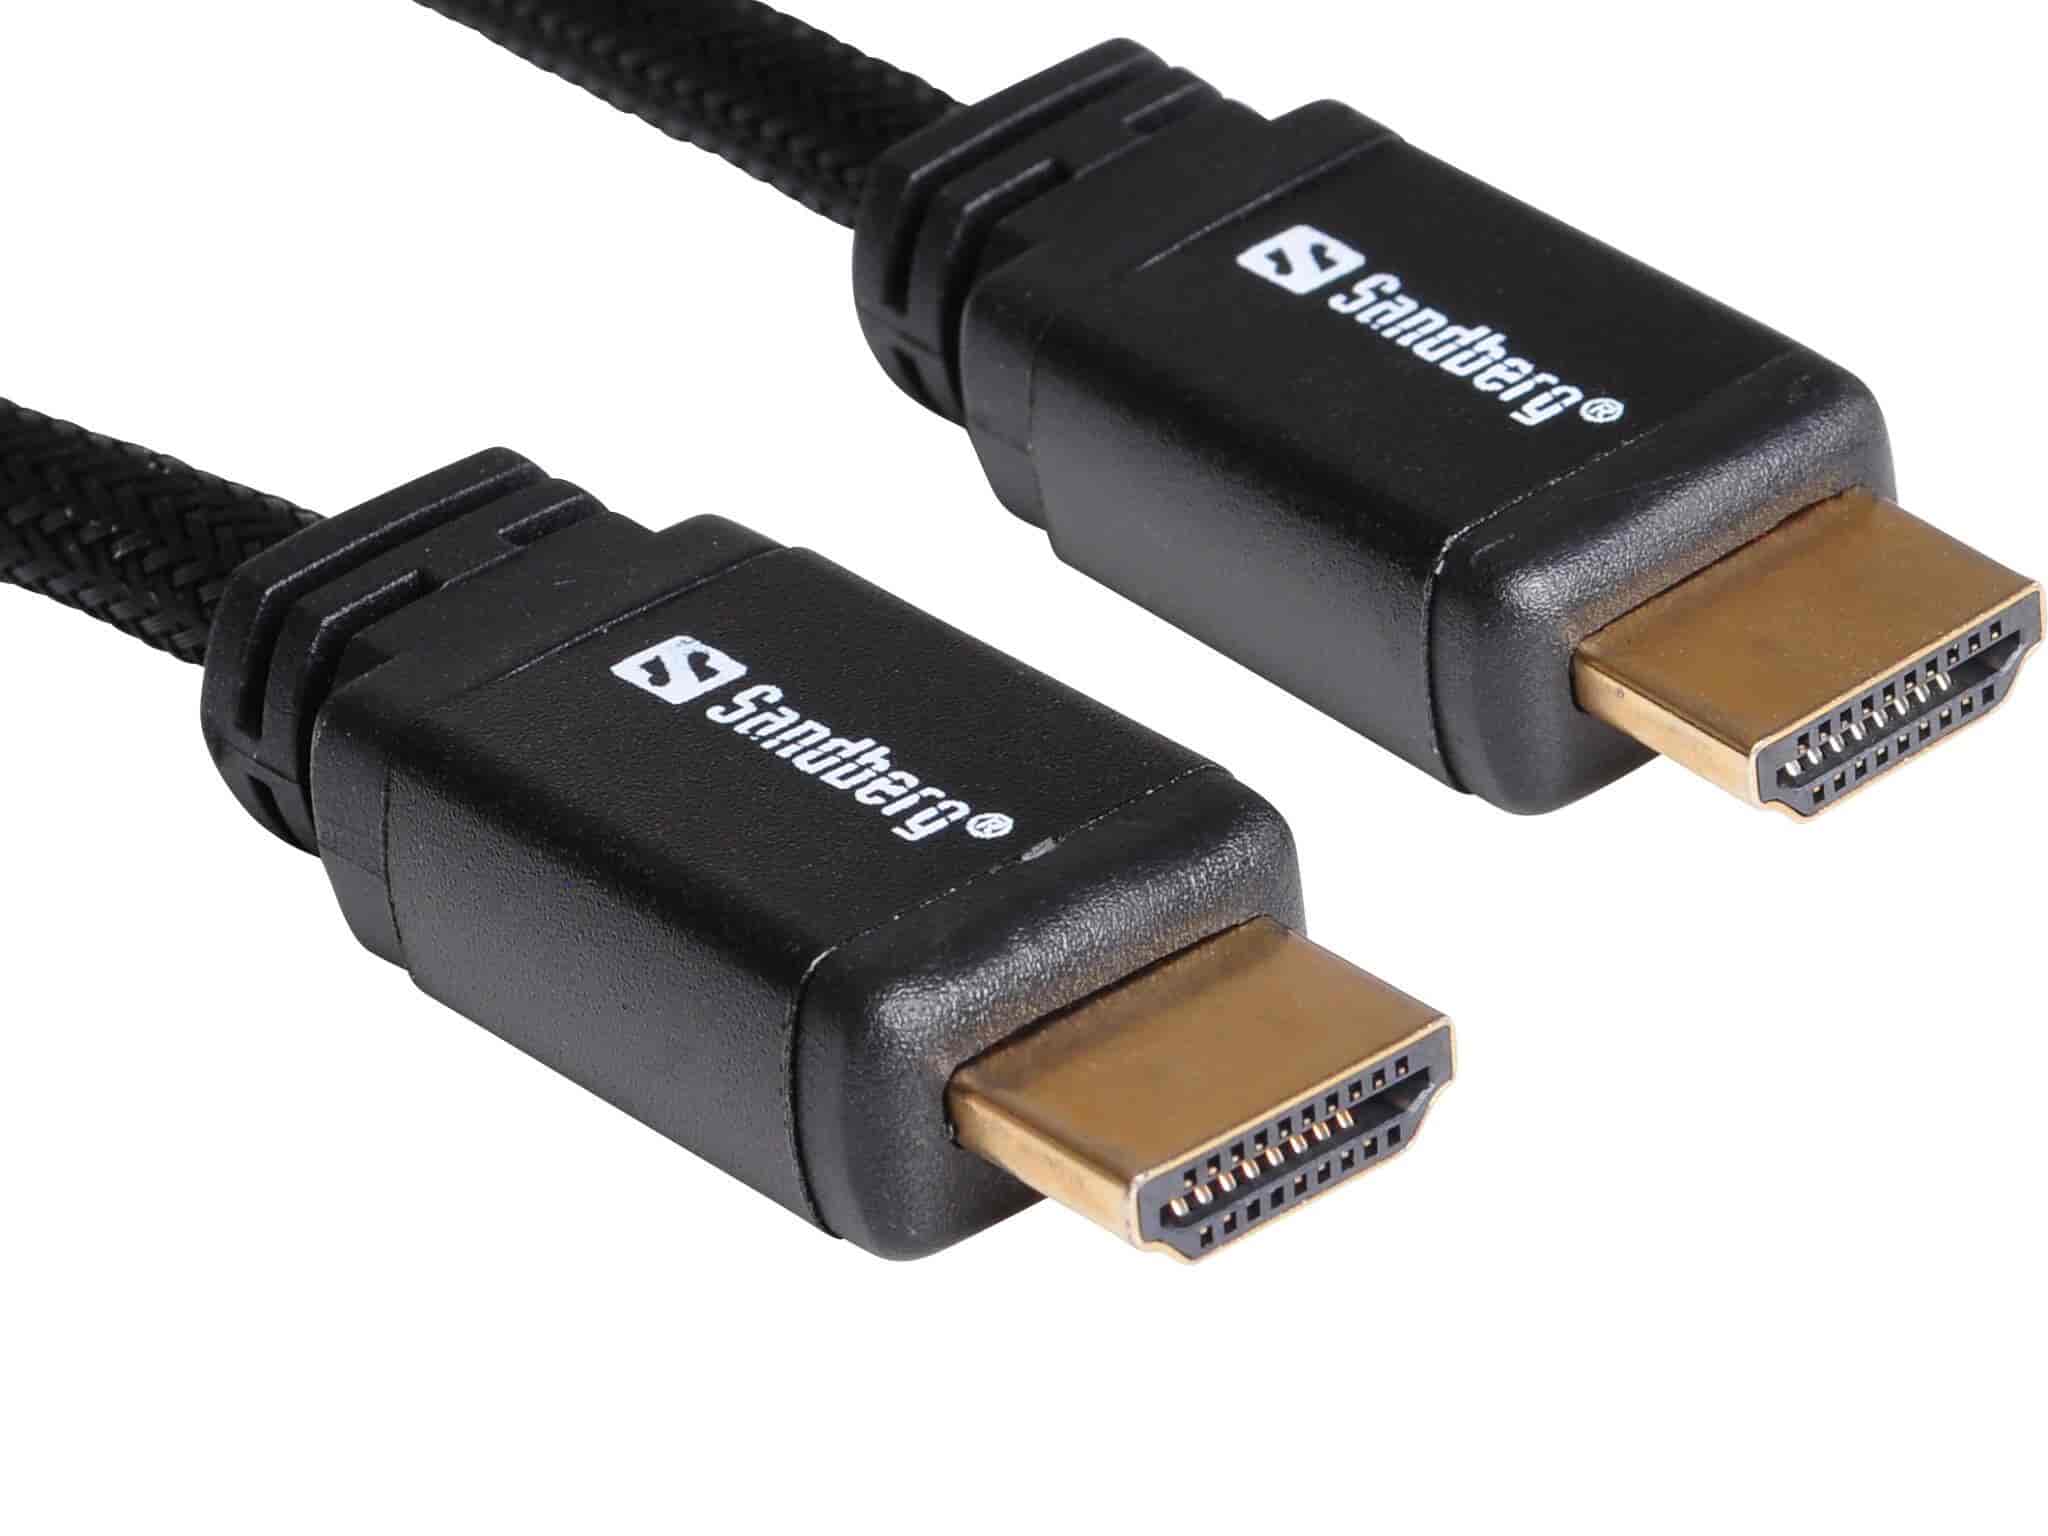 Sandberg HDMI 2.0 19M-19M, 2mWith HDMI you can transfer razor-sharp digital quality sound and images. You can use this cable to connect HDMI devices like your Blu-Ray player or games console to your TV with an HDMI connector.Sandberg